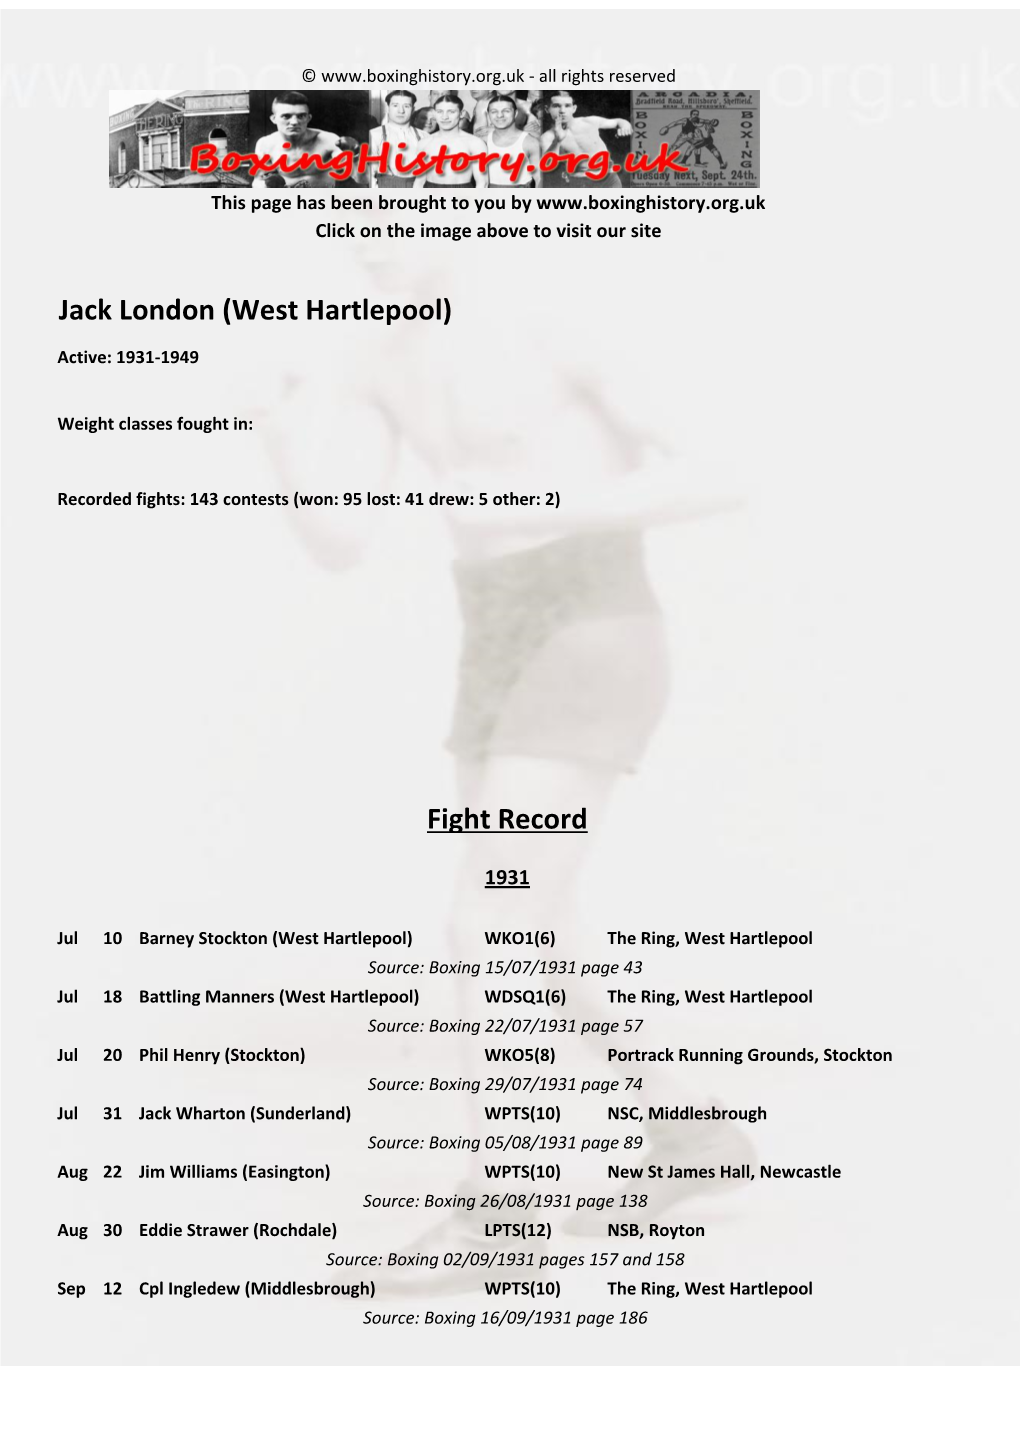 Fight Record Jack London (West Hartlepool)